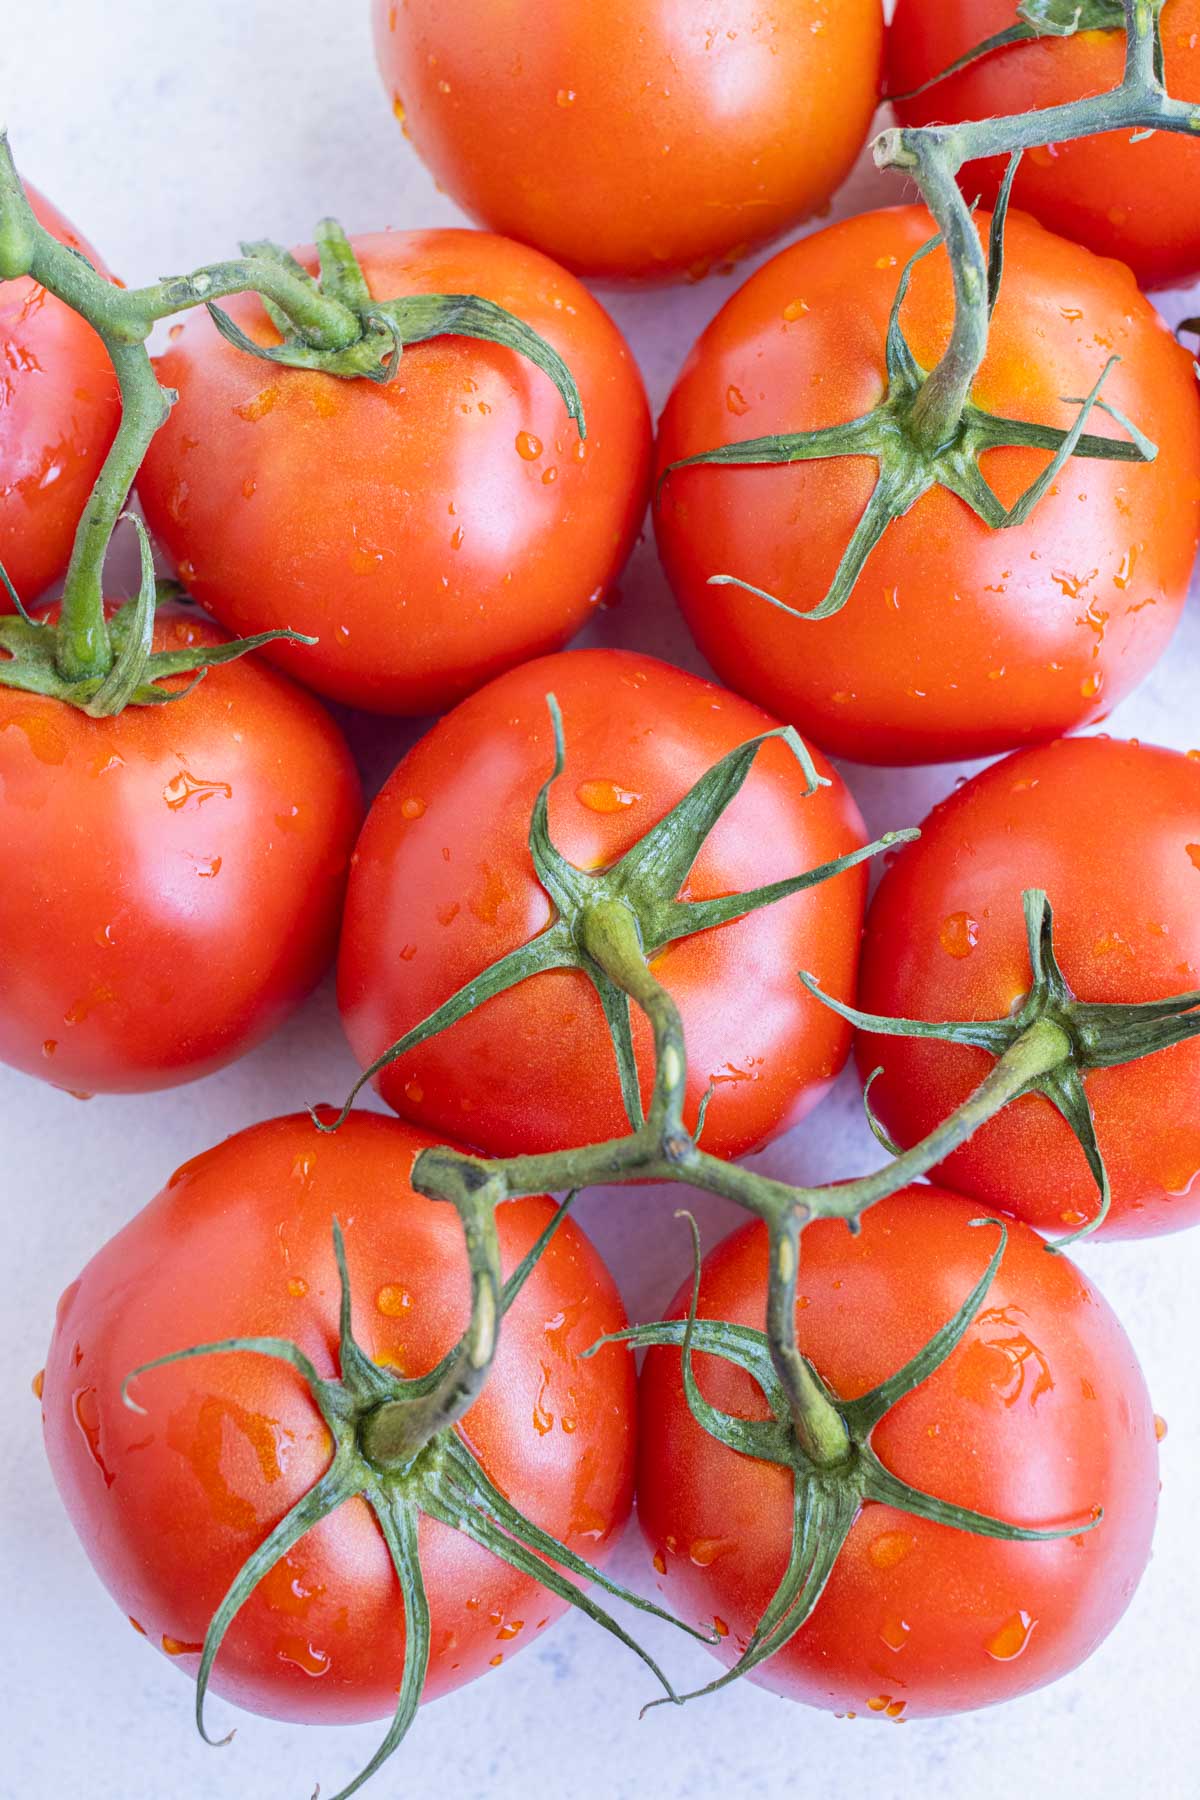 Fresh, in season tomatoes are delicious and healthy.